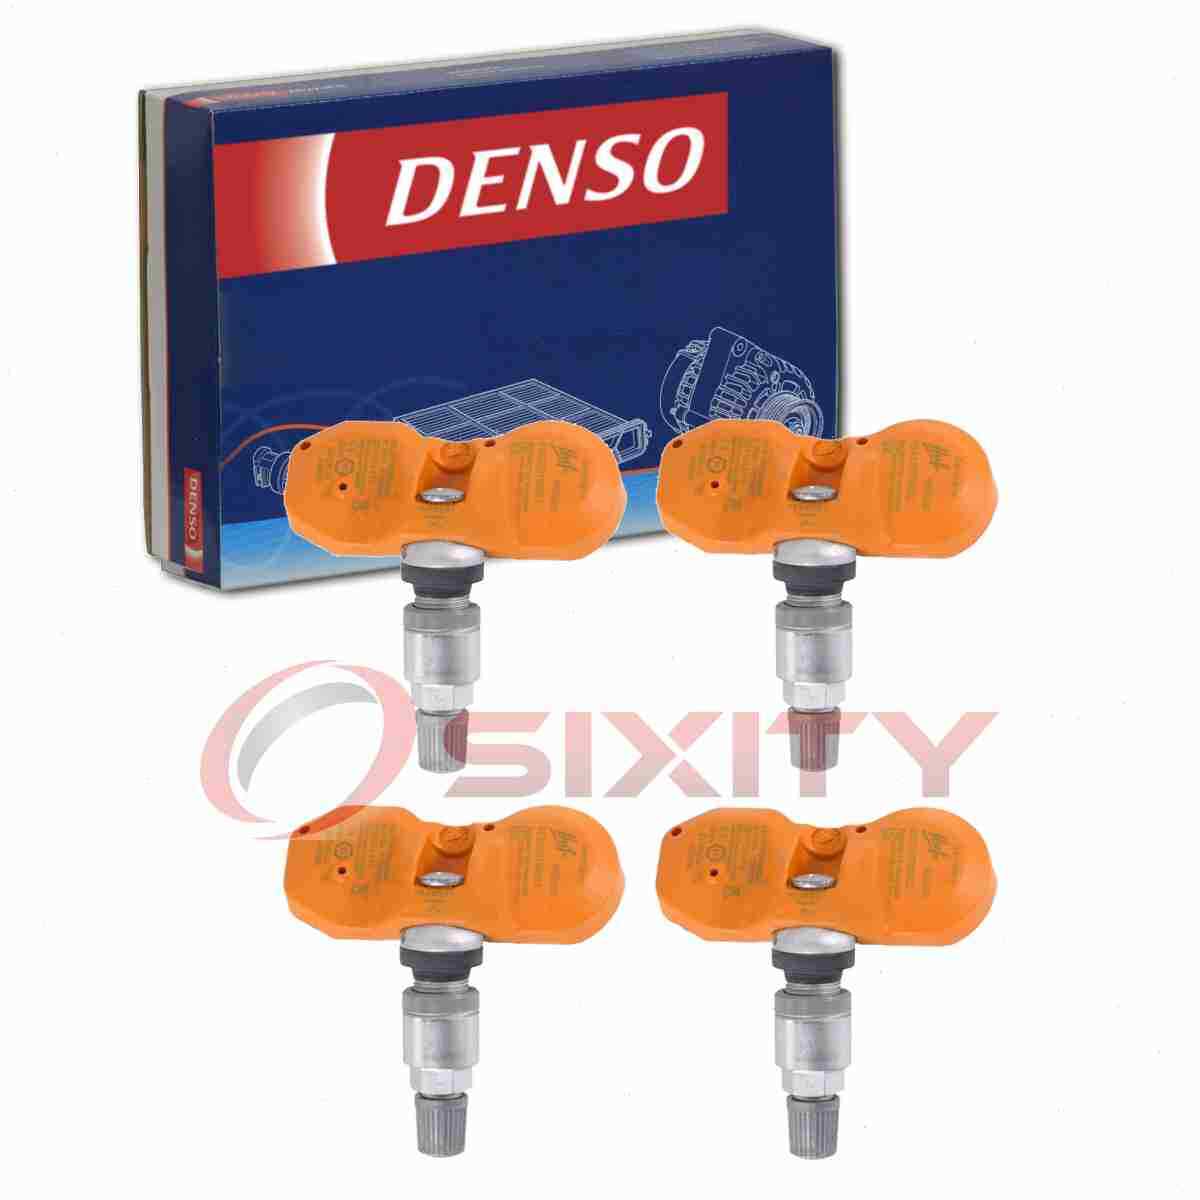 4 pc Denso Tire Pressure Monitoring System Sensors for 1999 BMW 328is Wheel  ha